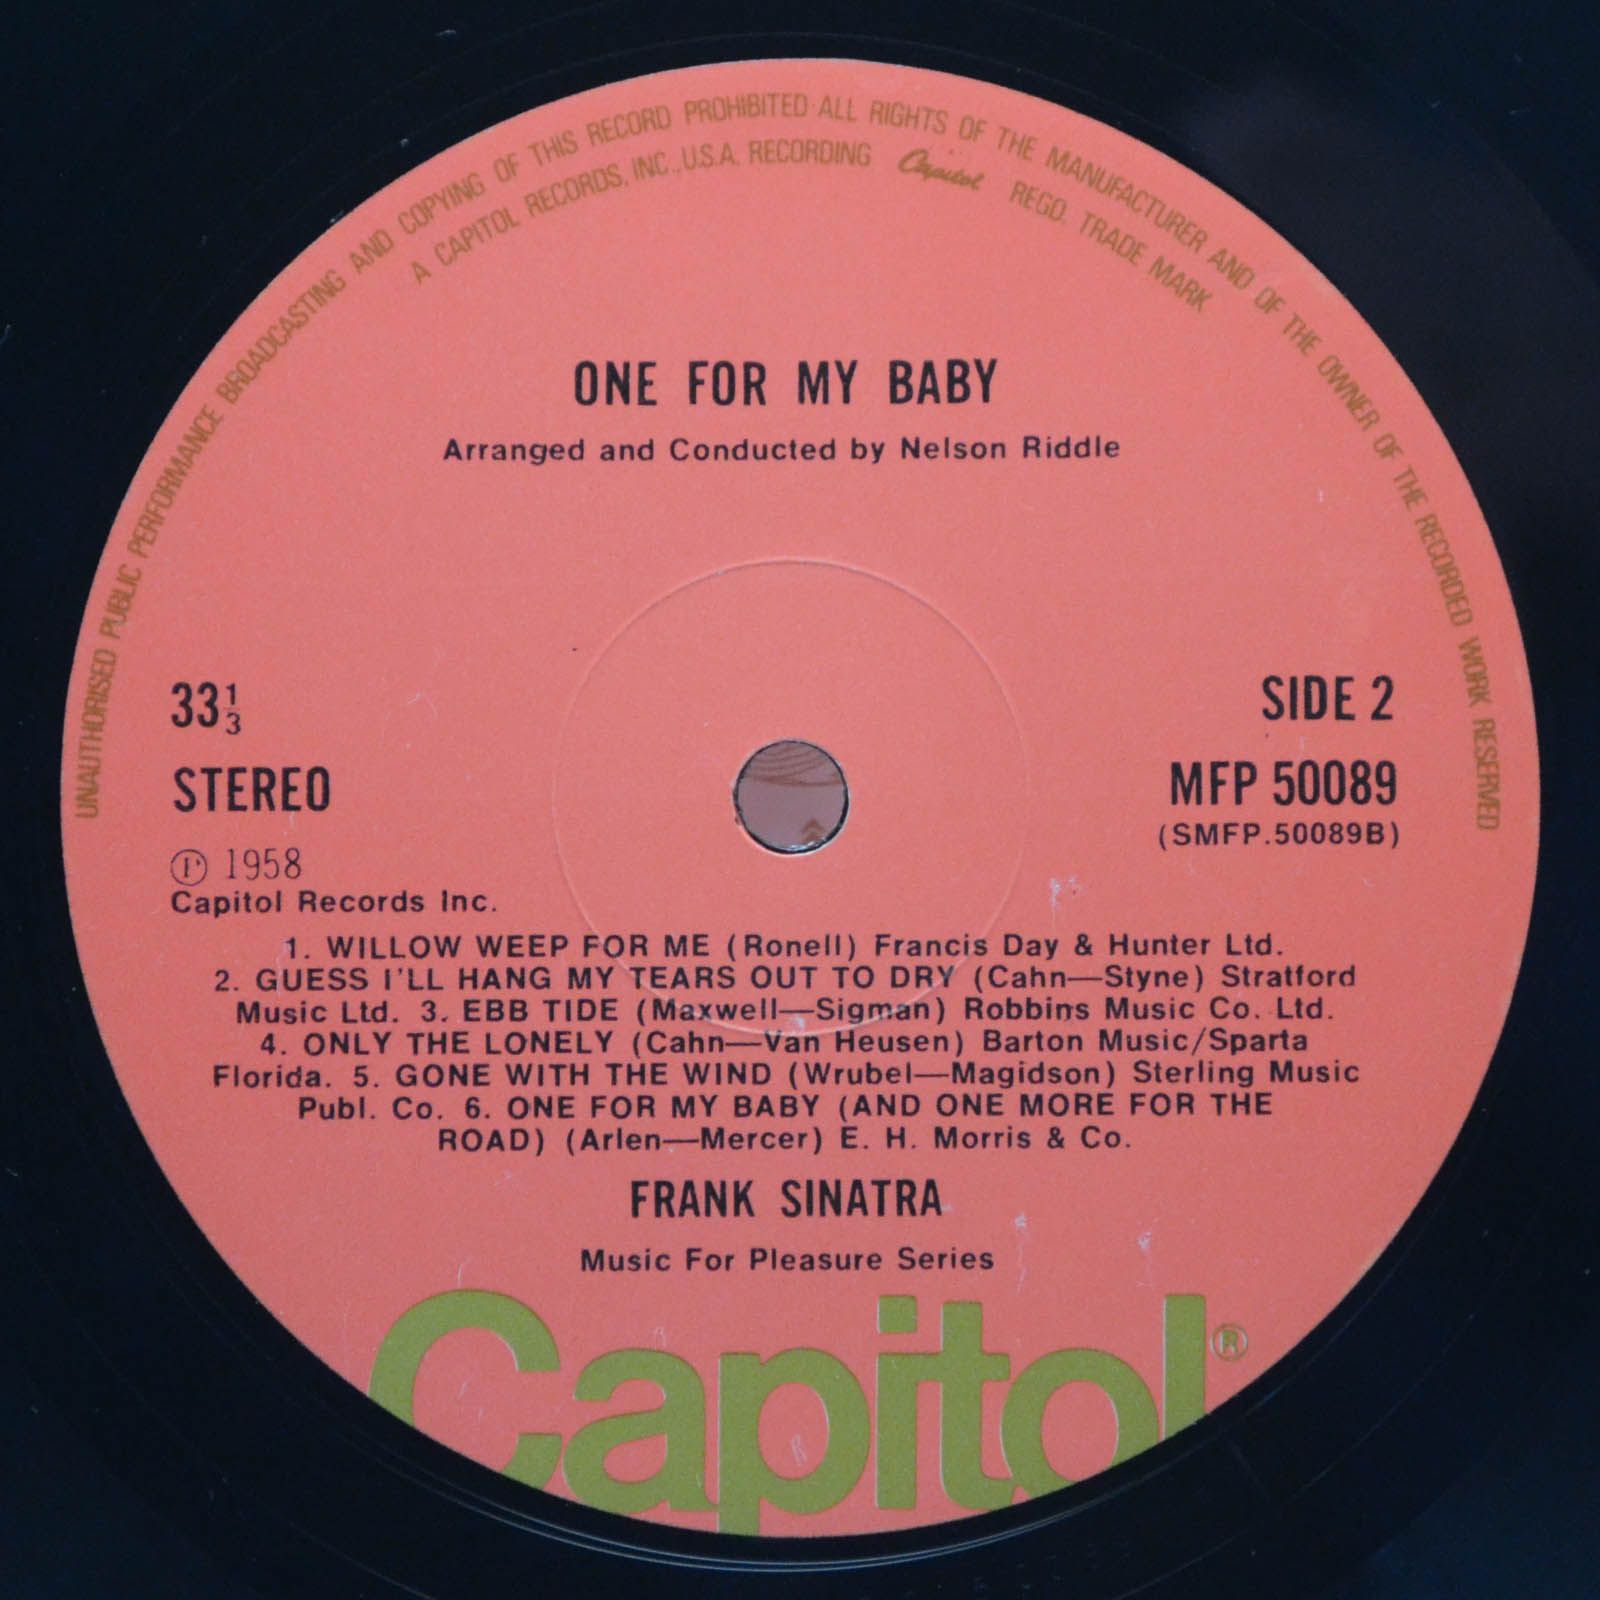 Frank Sinatra — One For My Baby (UK), 1958